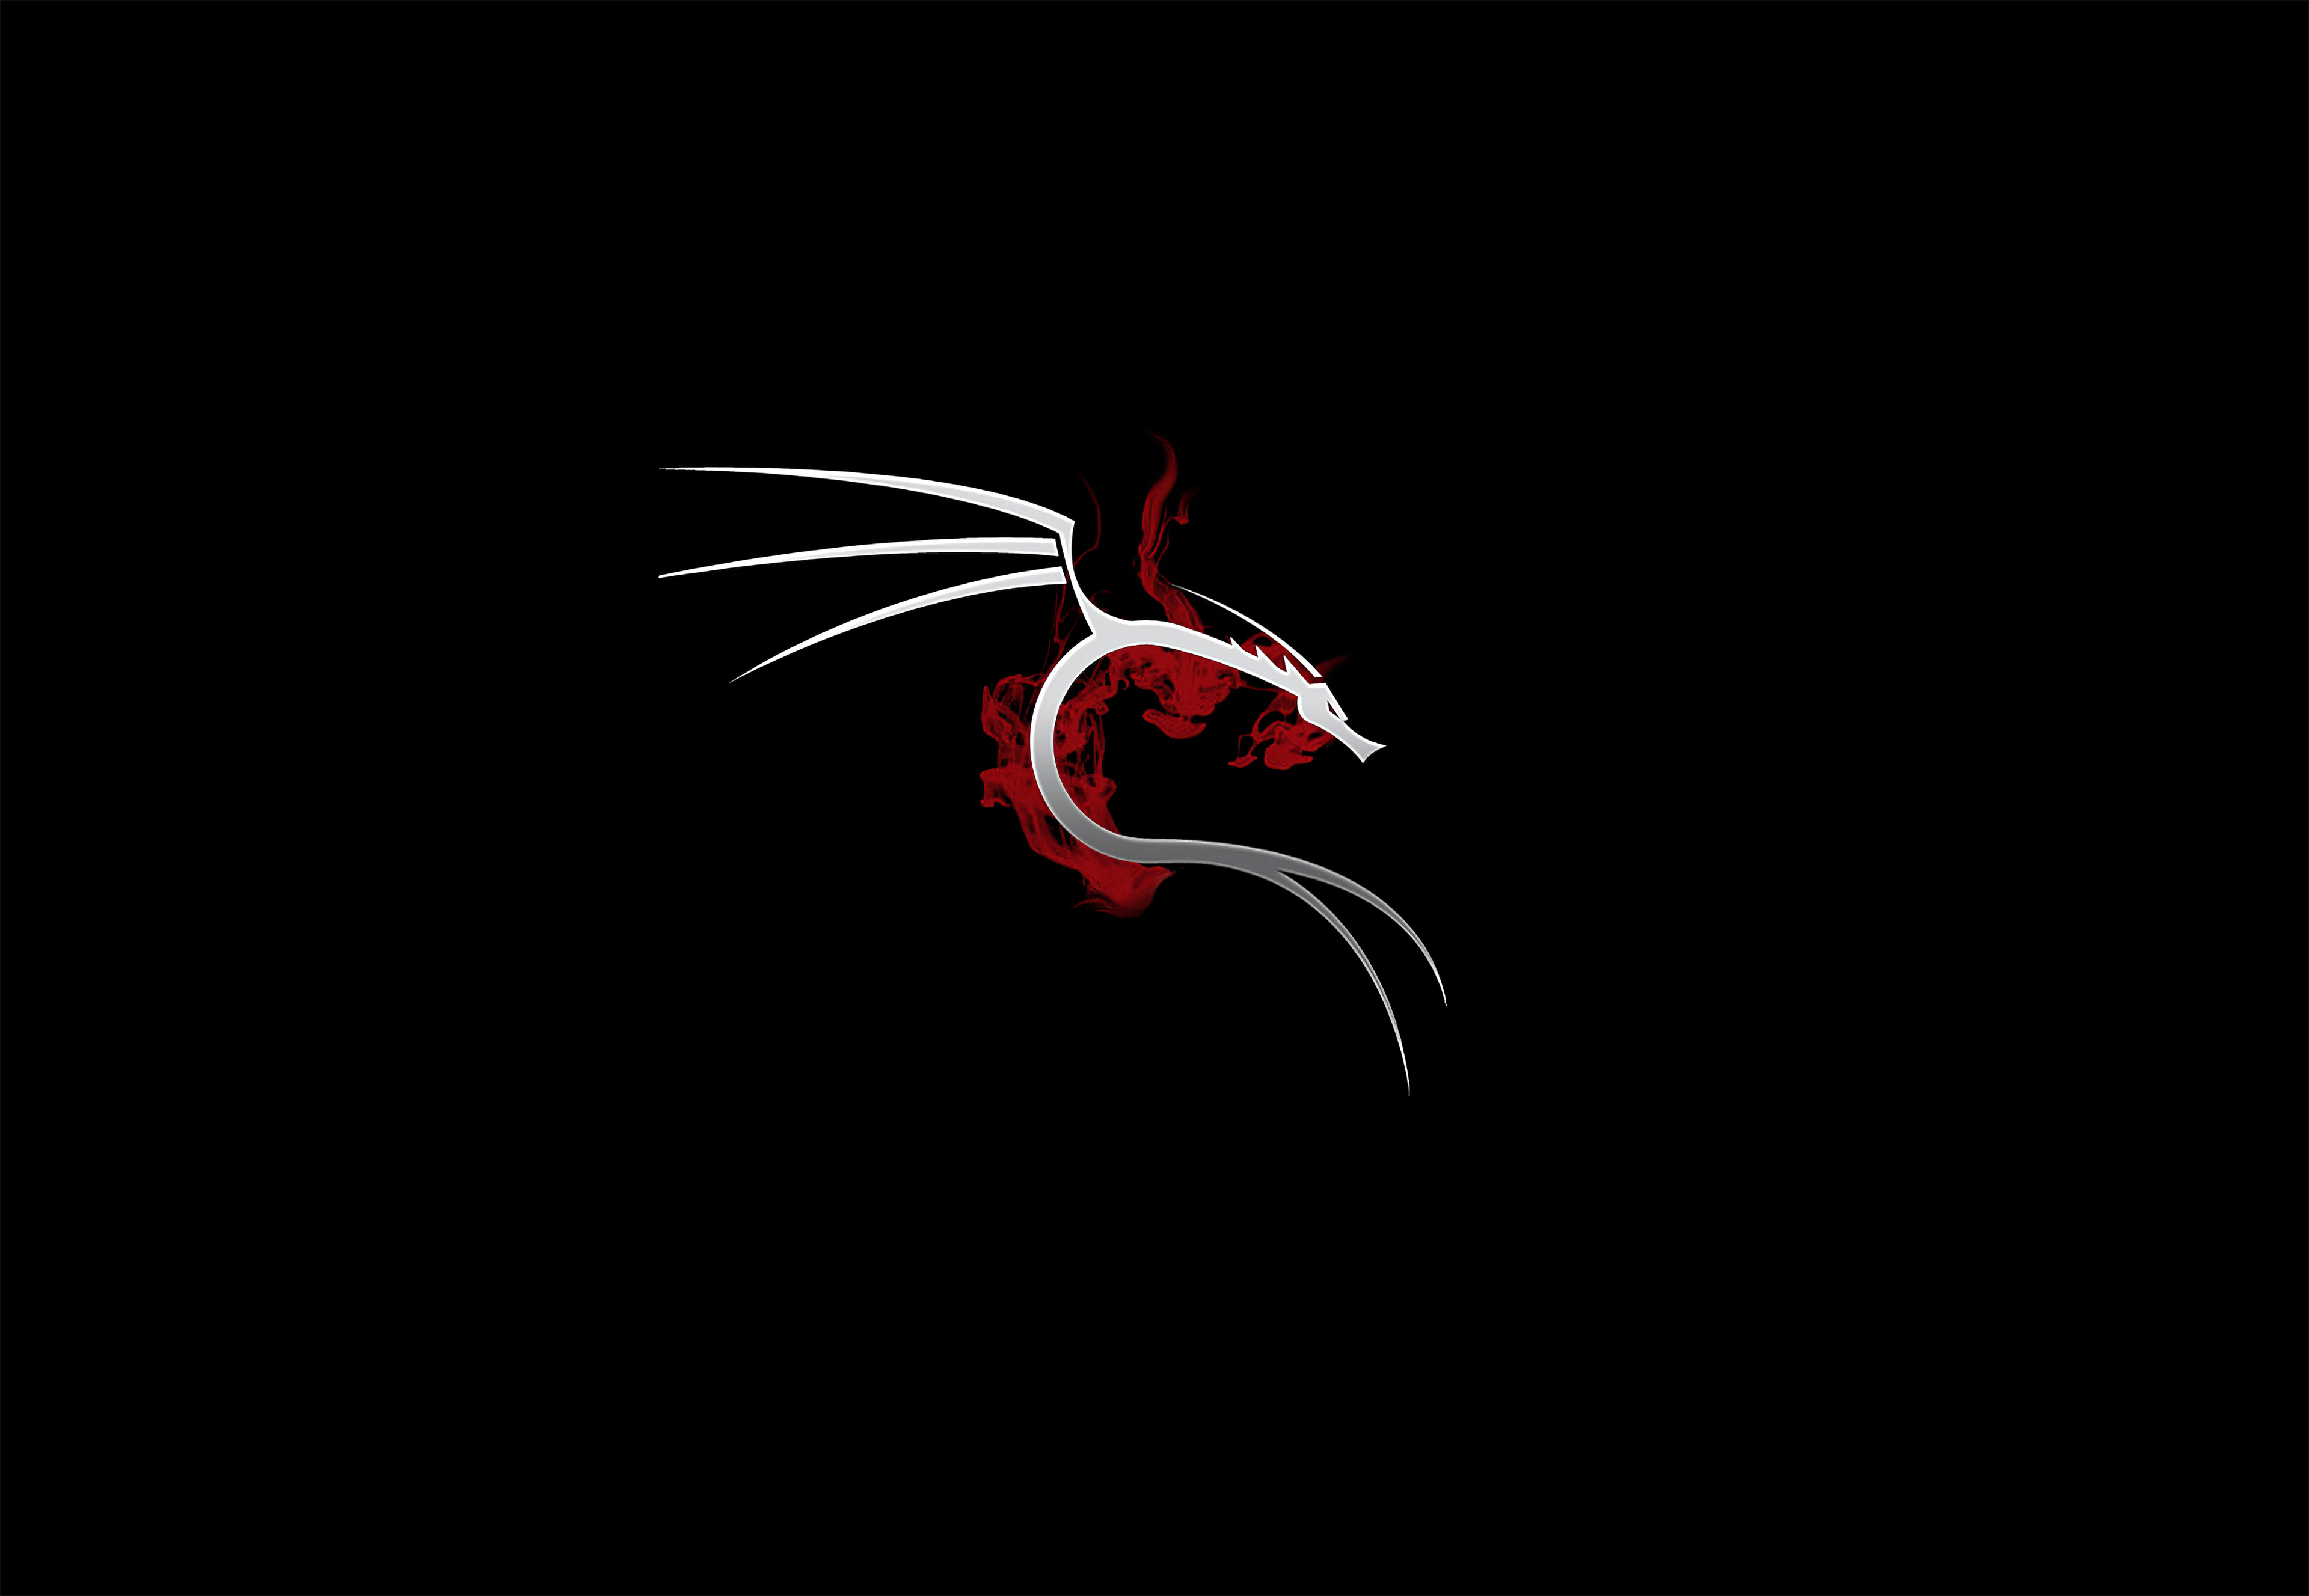 1360x768 Kali Linux 4k Laptop Hd Hd 4k Wallpapers Images Backgrounds Photos And Pictures